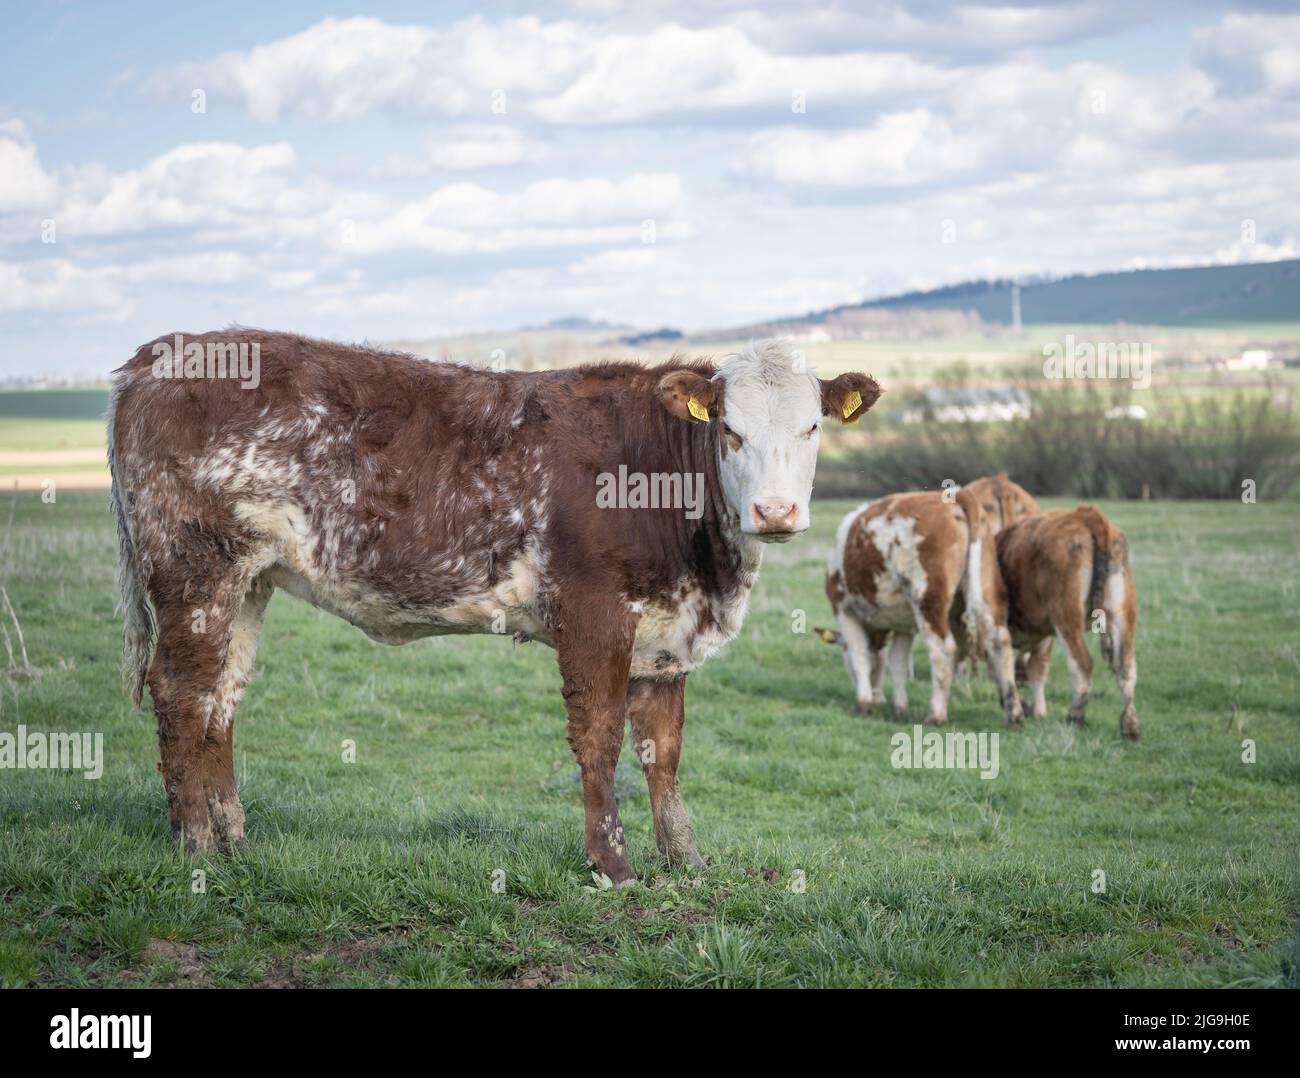 Young cow, bull standing on the green pasture looking at the camera with other cattle in background Stock Photo